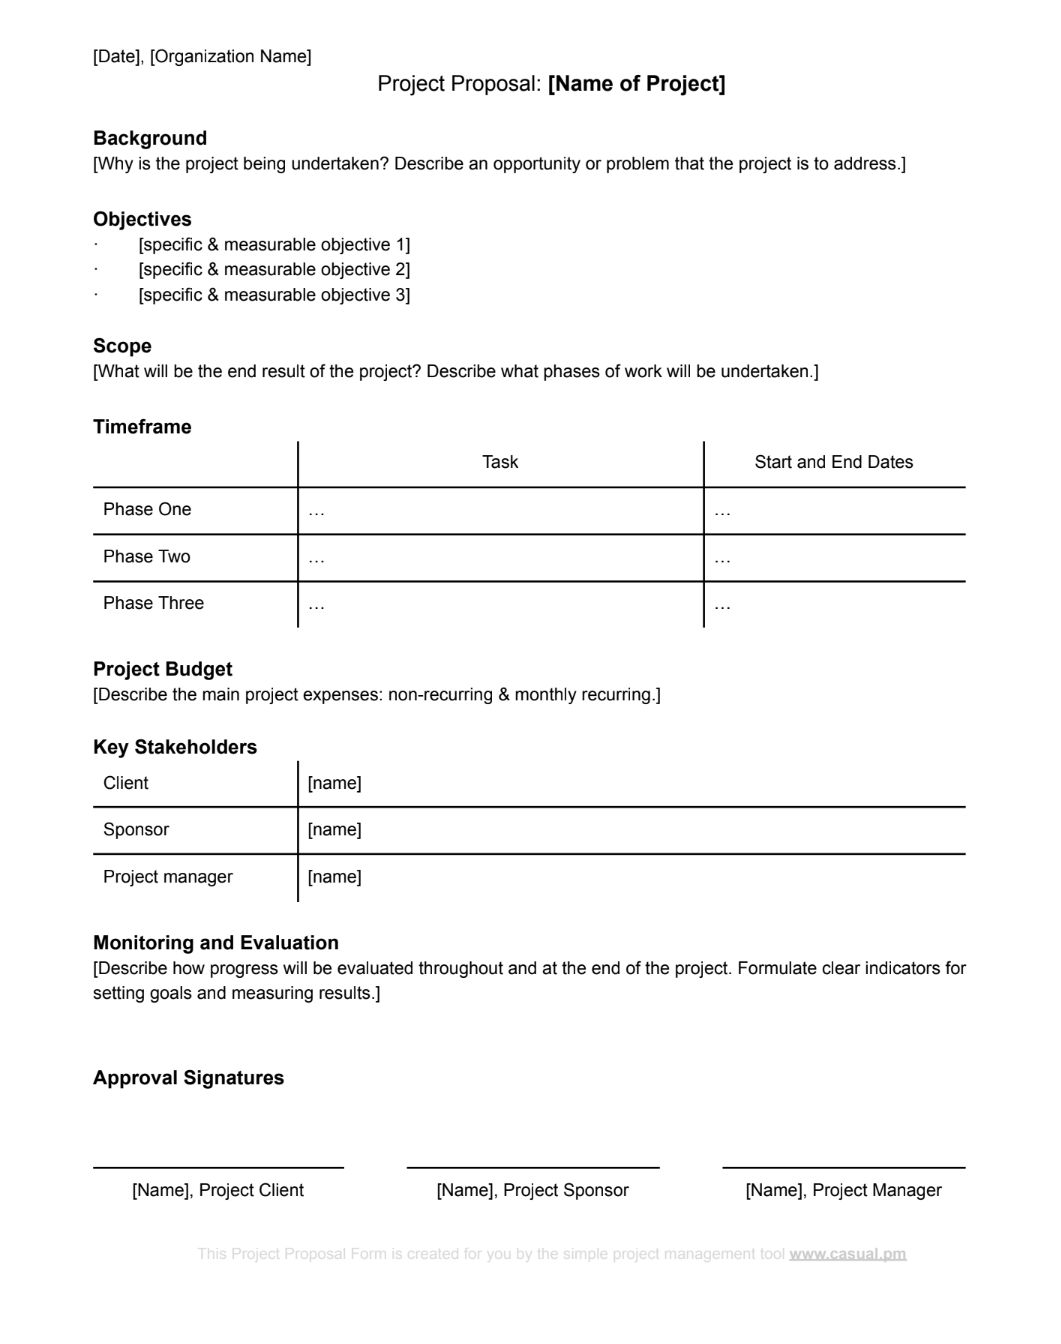 Image of proposal template by Casual